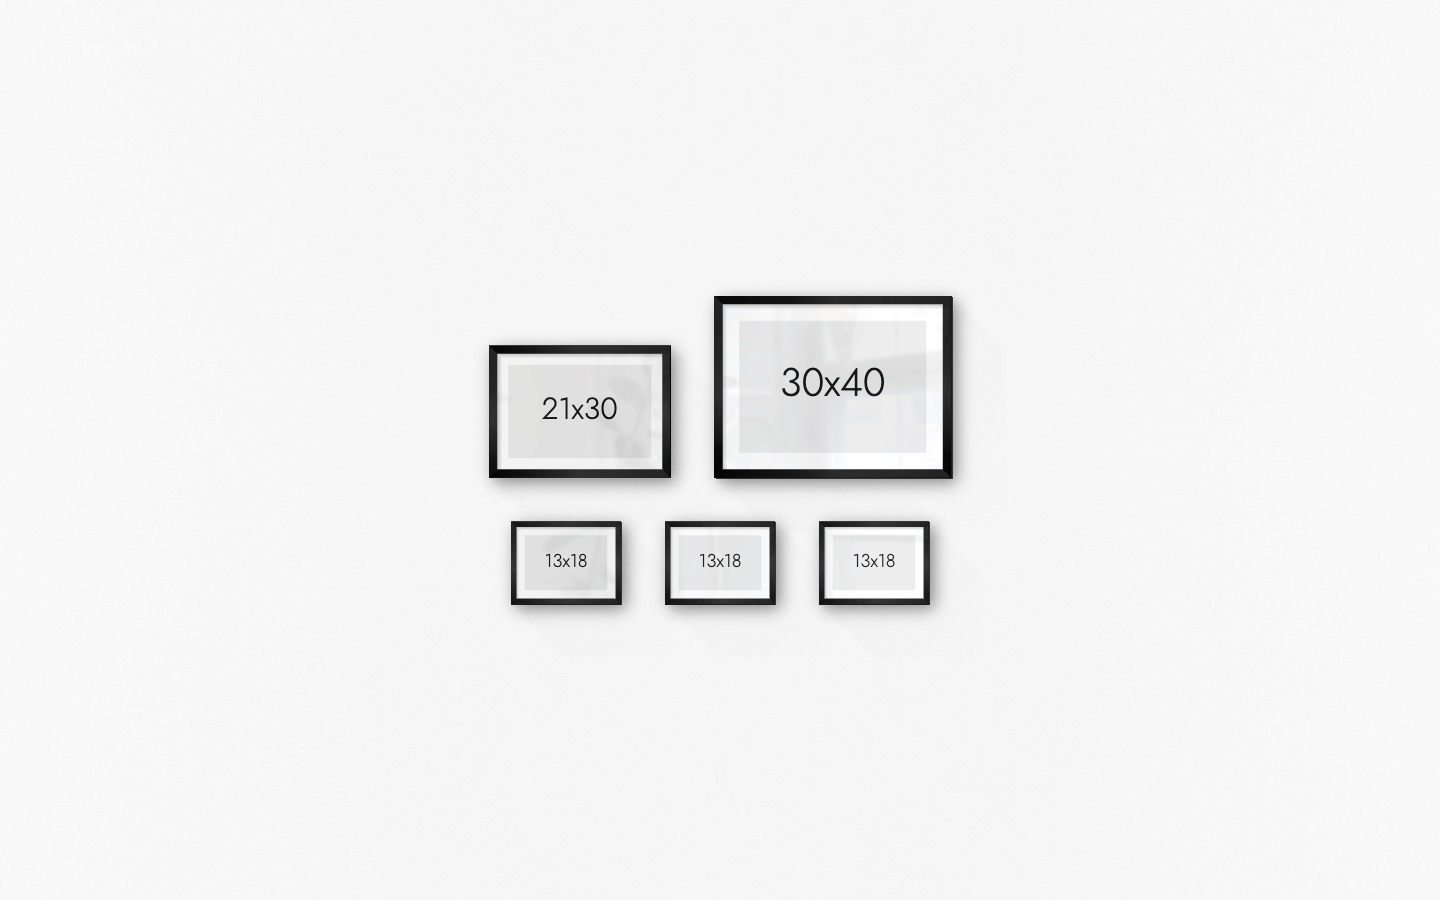 Gallery wall with picture frames in black in sizes 21x30, 30x40 and 13x18